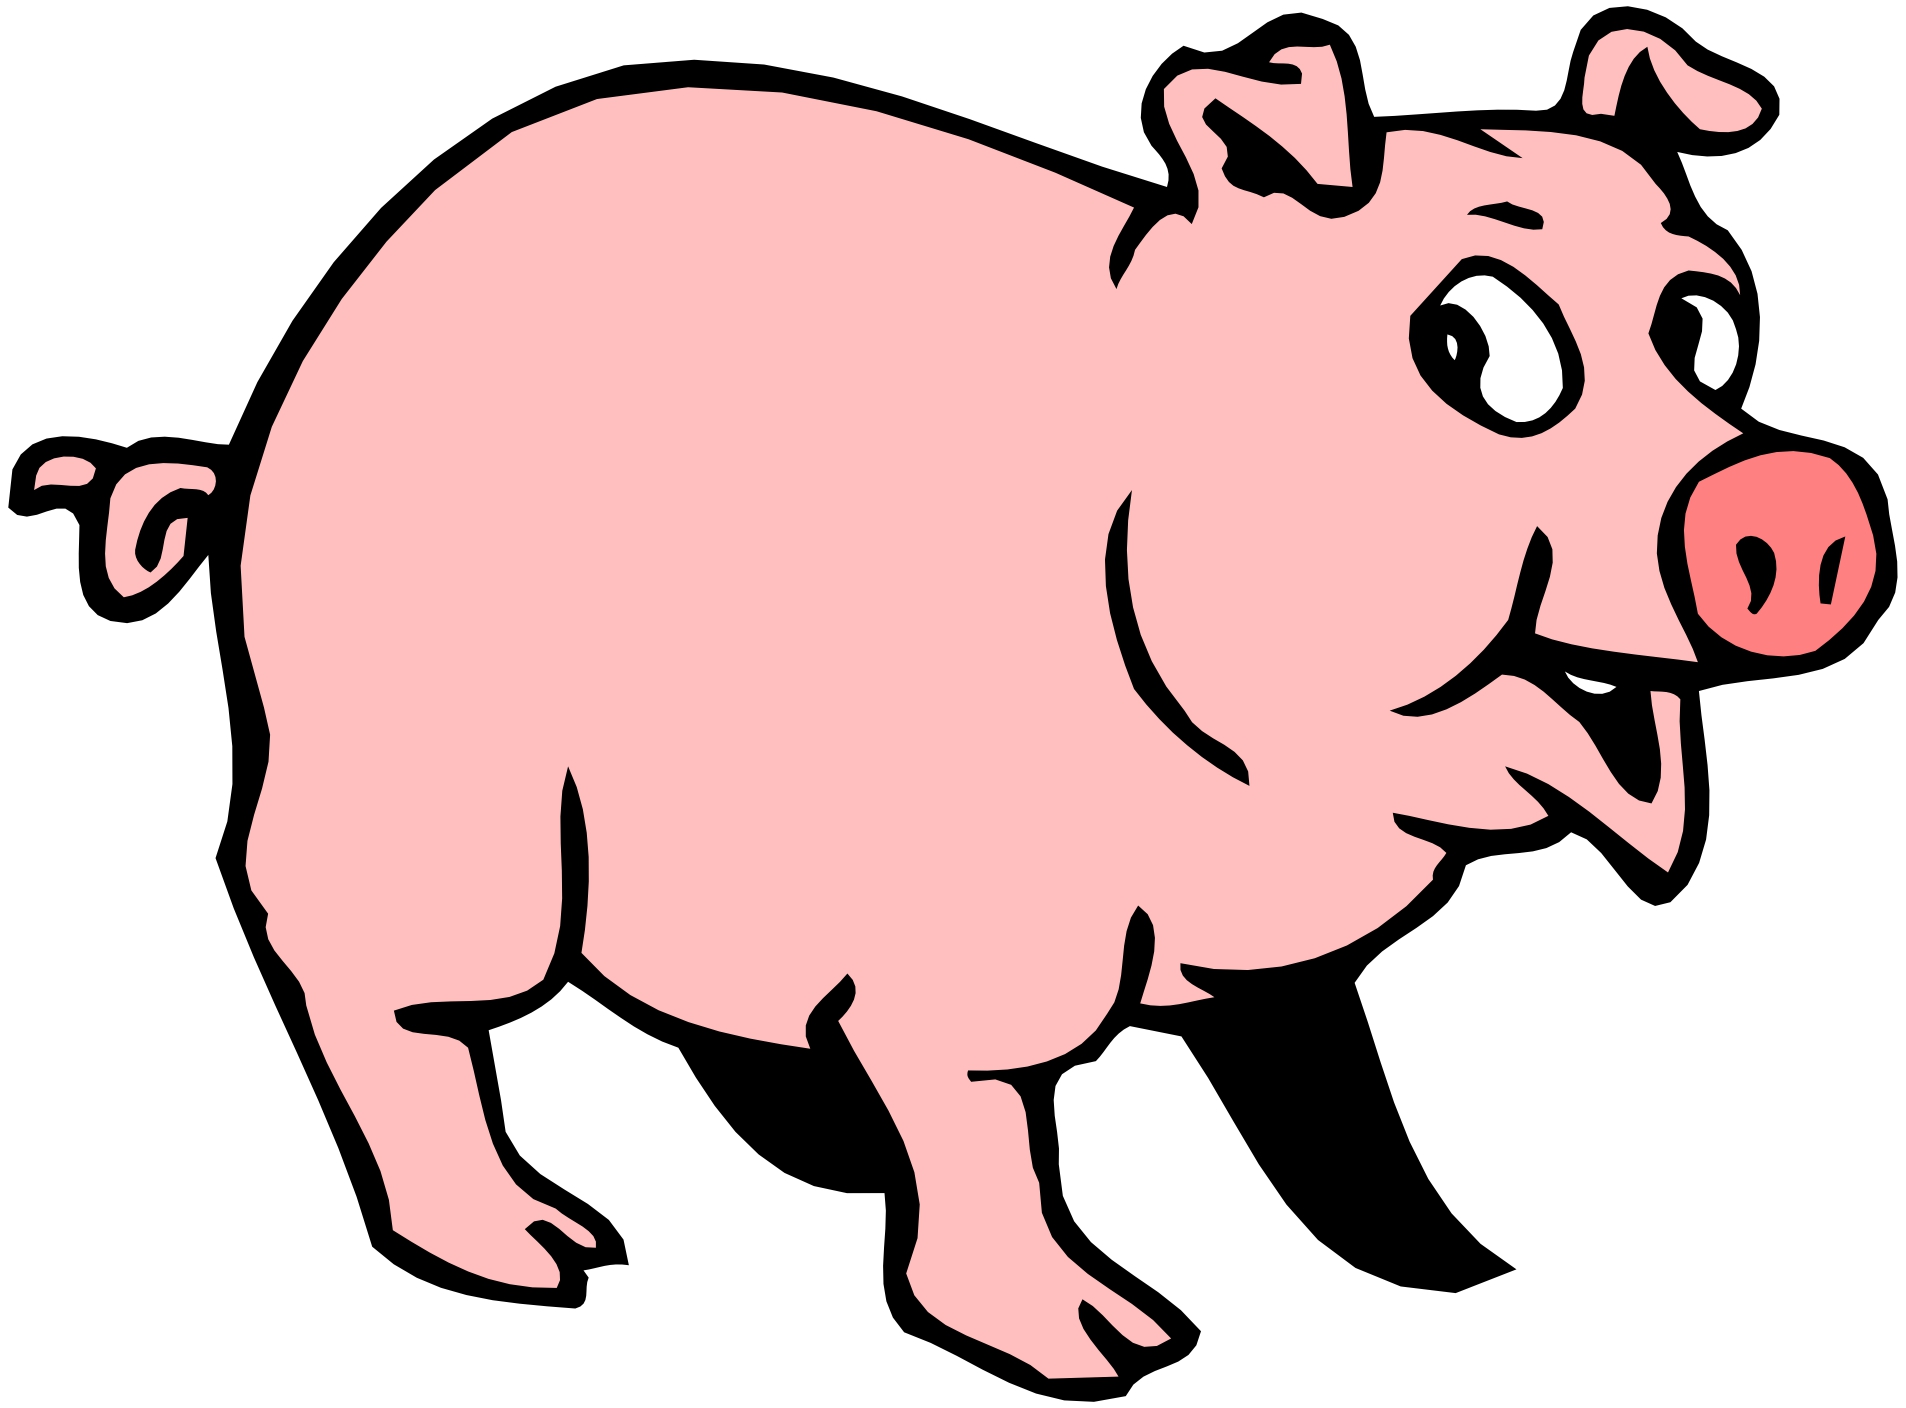 Pig Cartoon Image - Clipart library